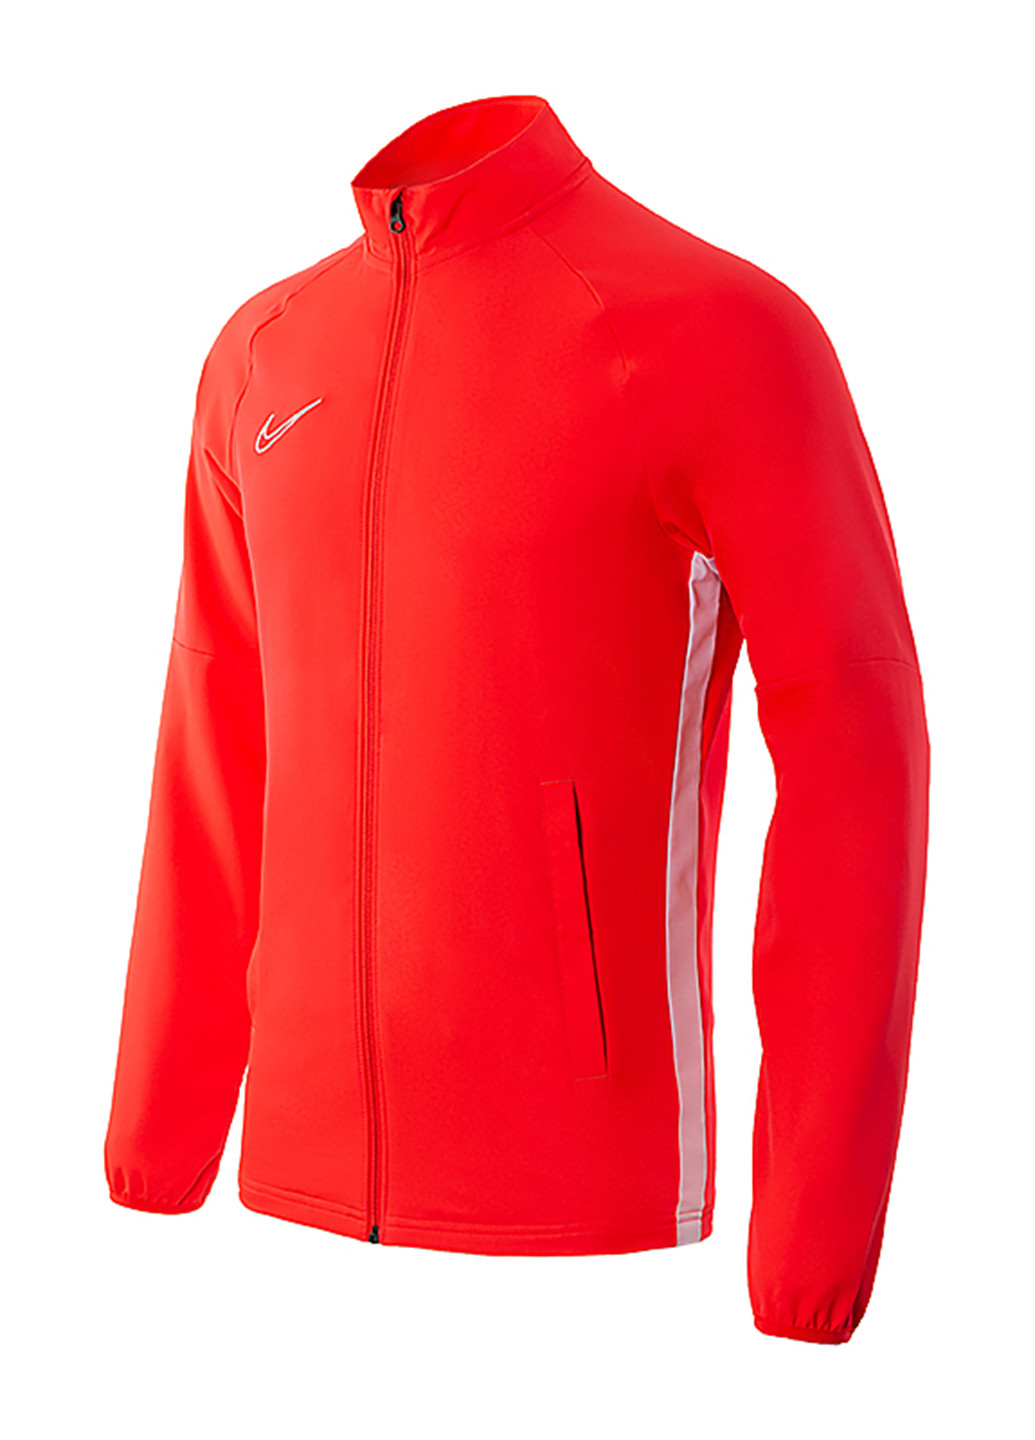 Толстовка Nike woven track jacket a c a d e m y 1 9 (193786152)